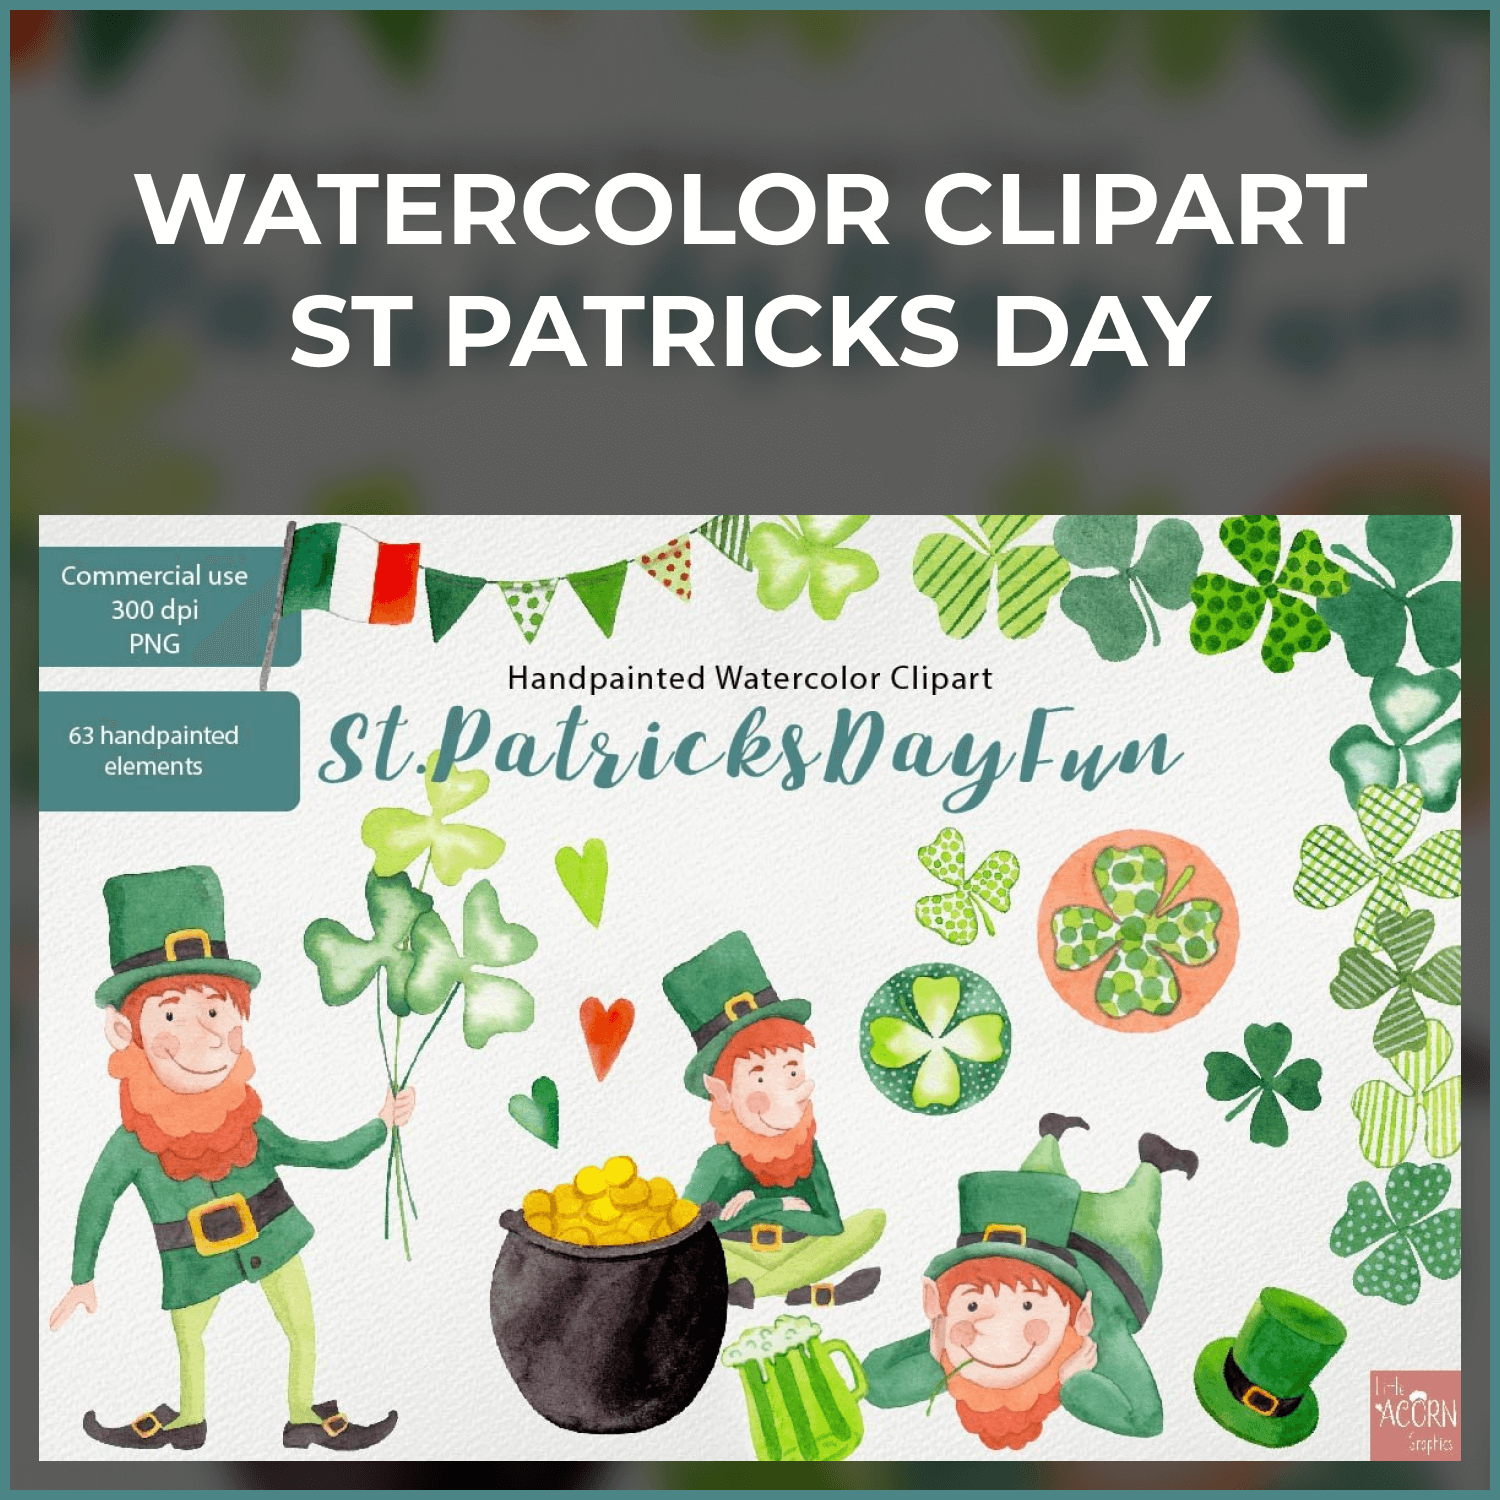 Watercolor clipart st patricks day.